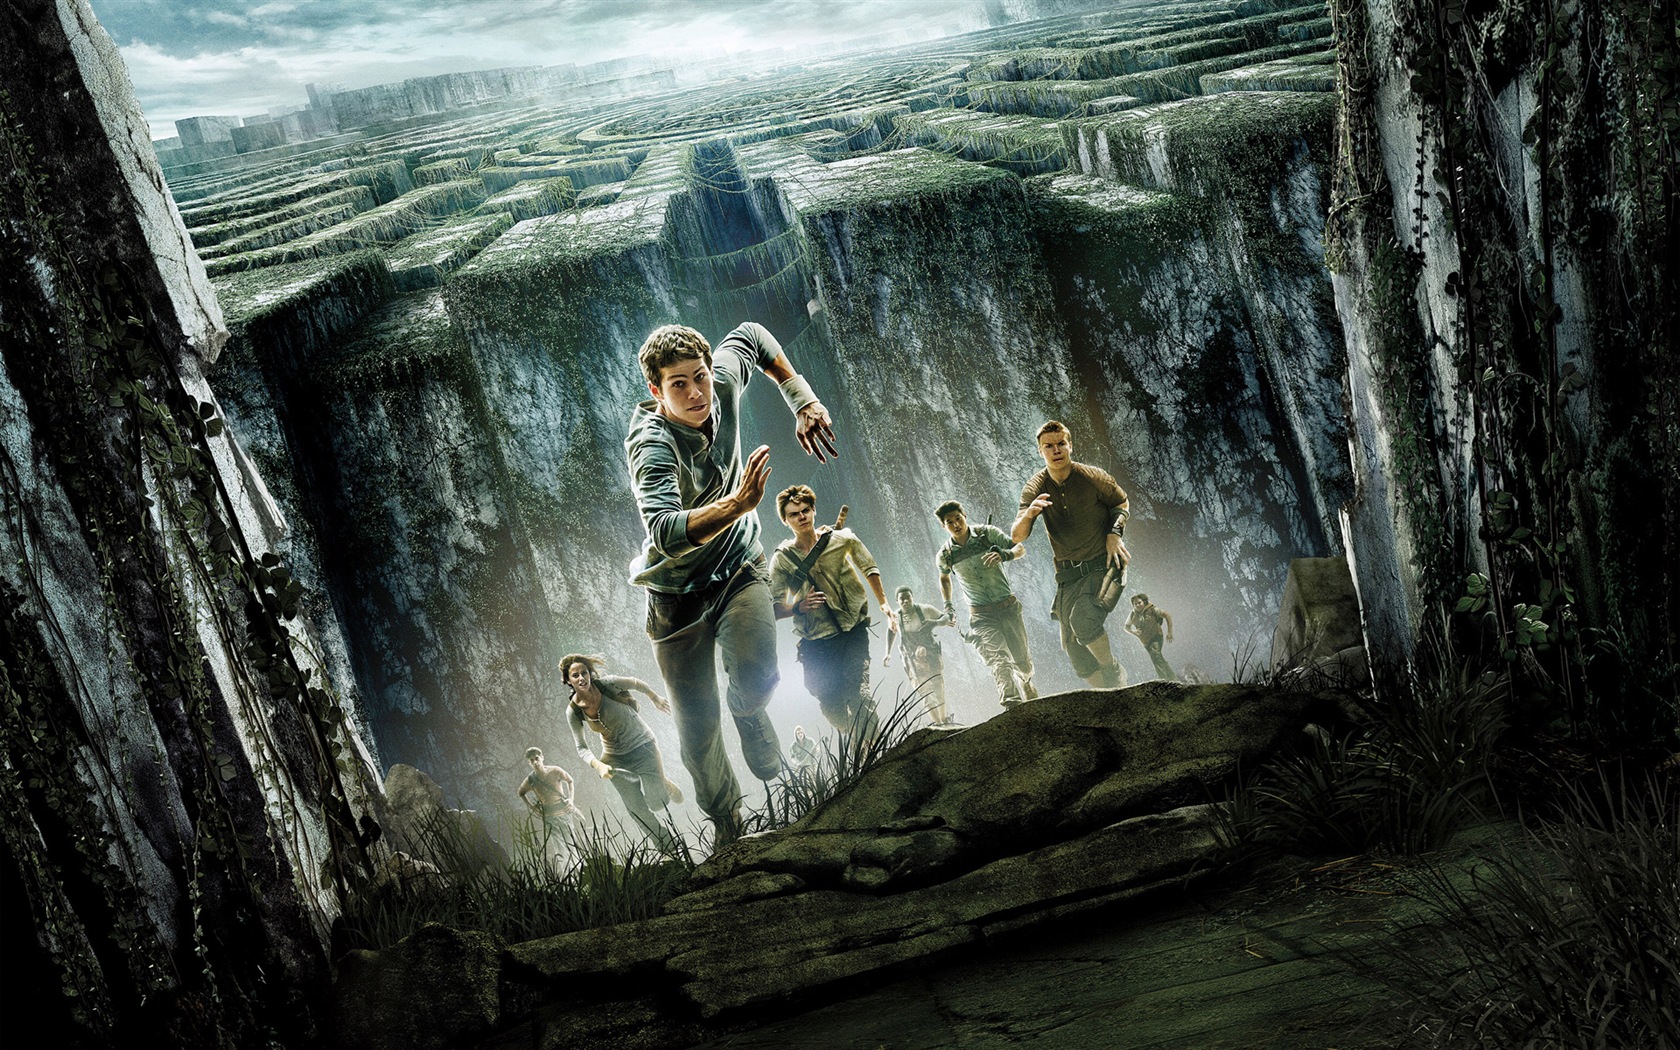 The Maze Runner HD movie wallpapers #6 - 1680x1050